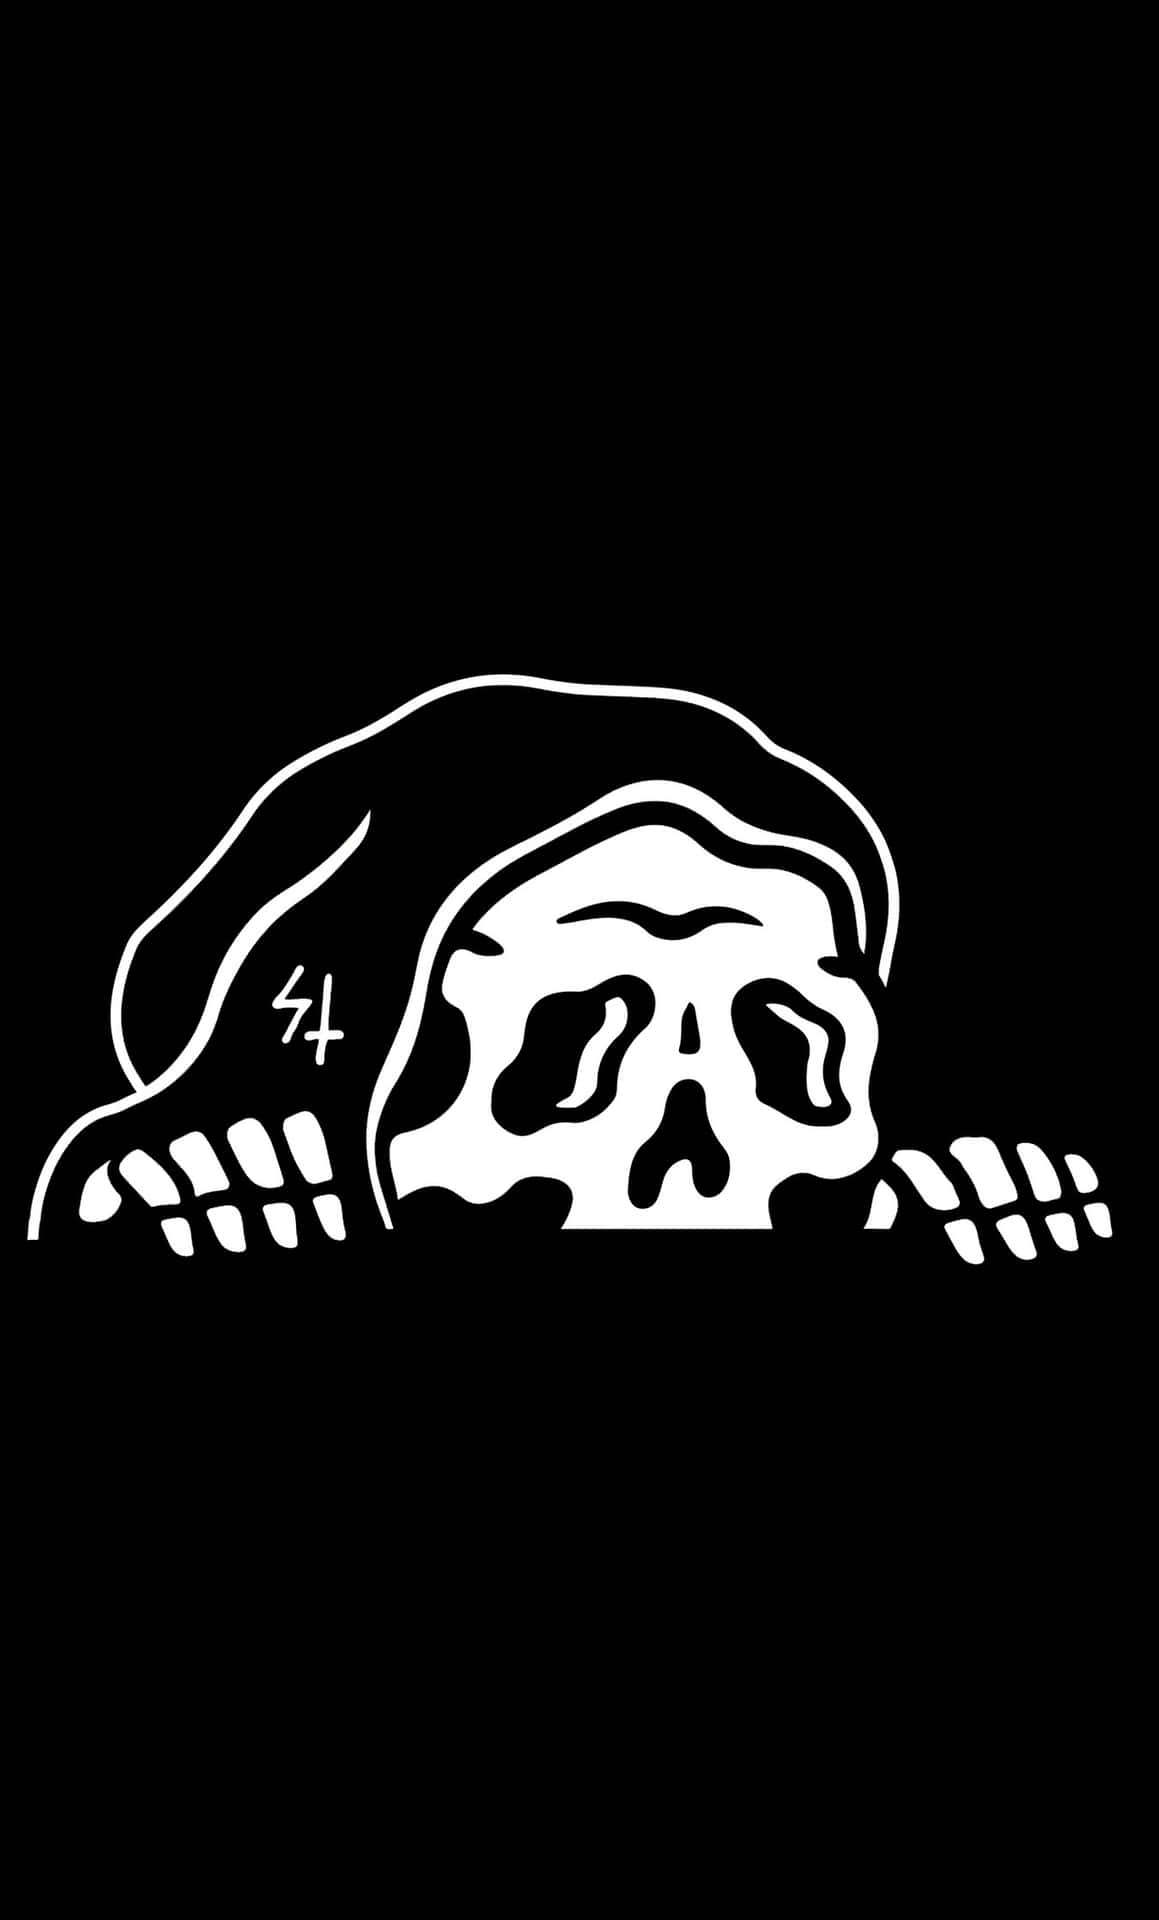 A Skull With A Hat On A Black Background Wallpaper